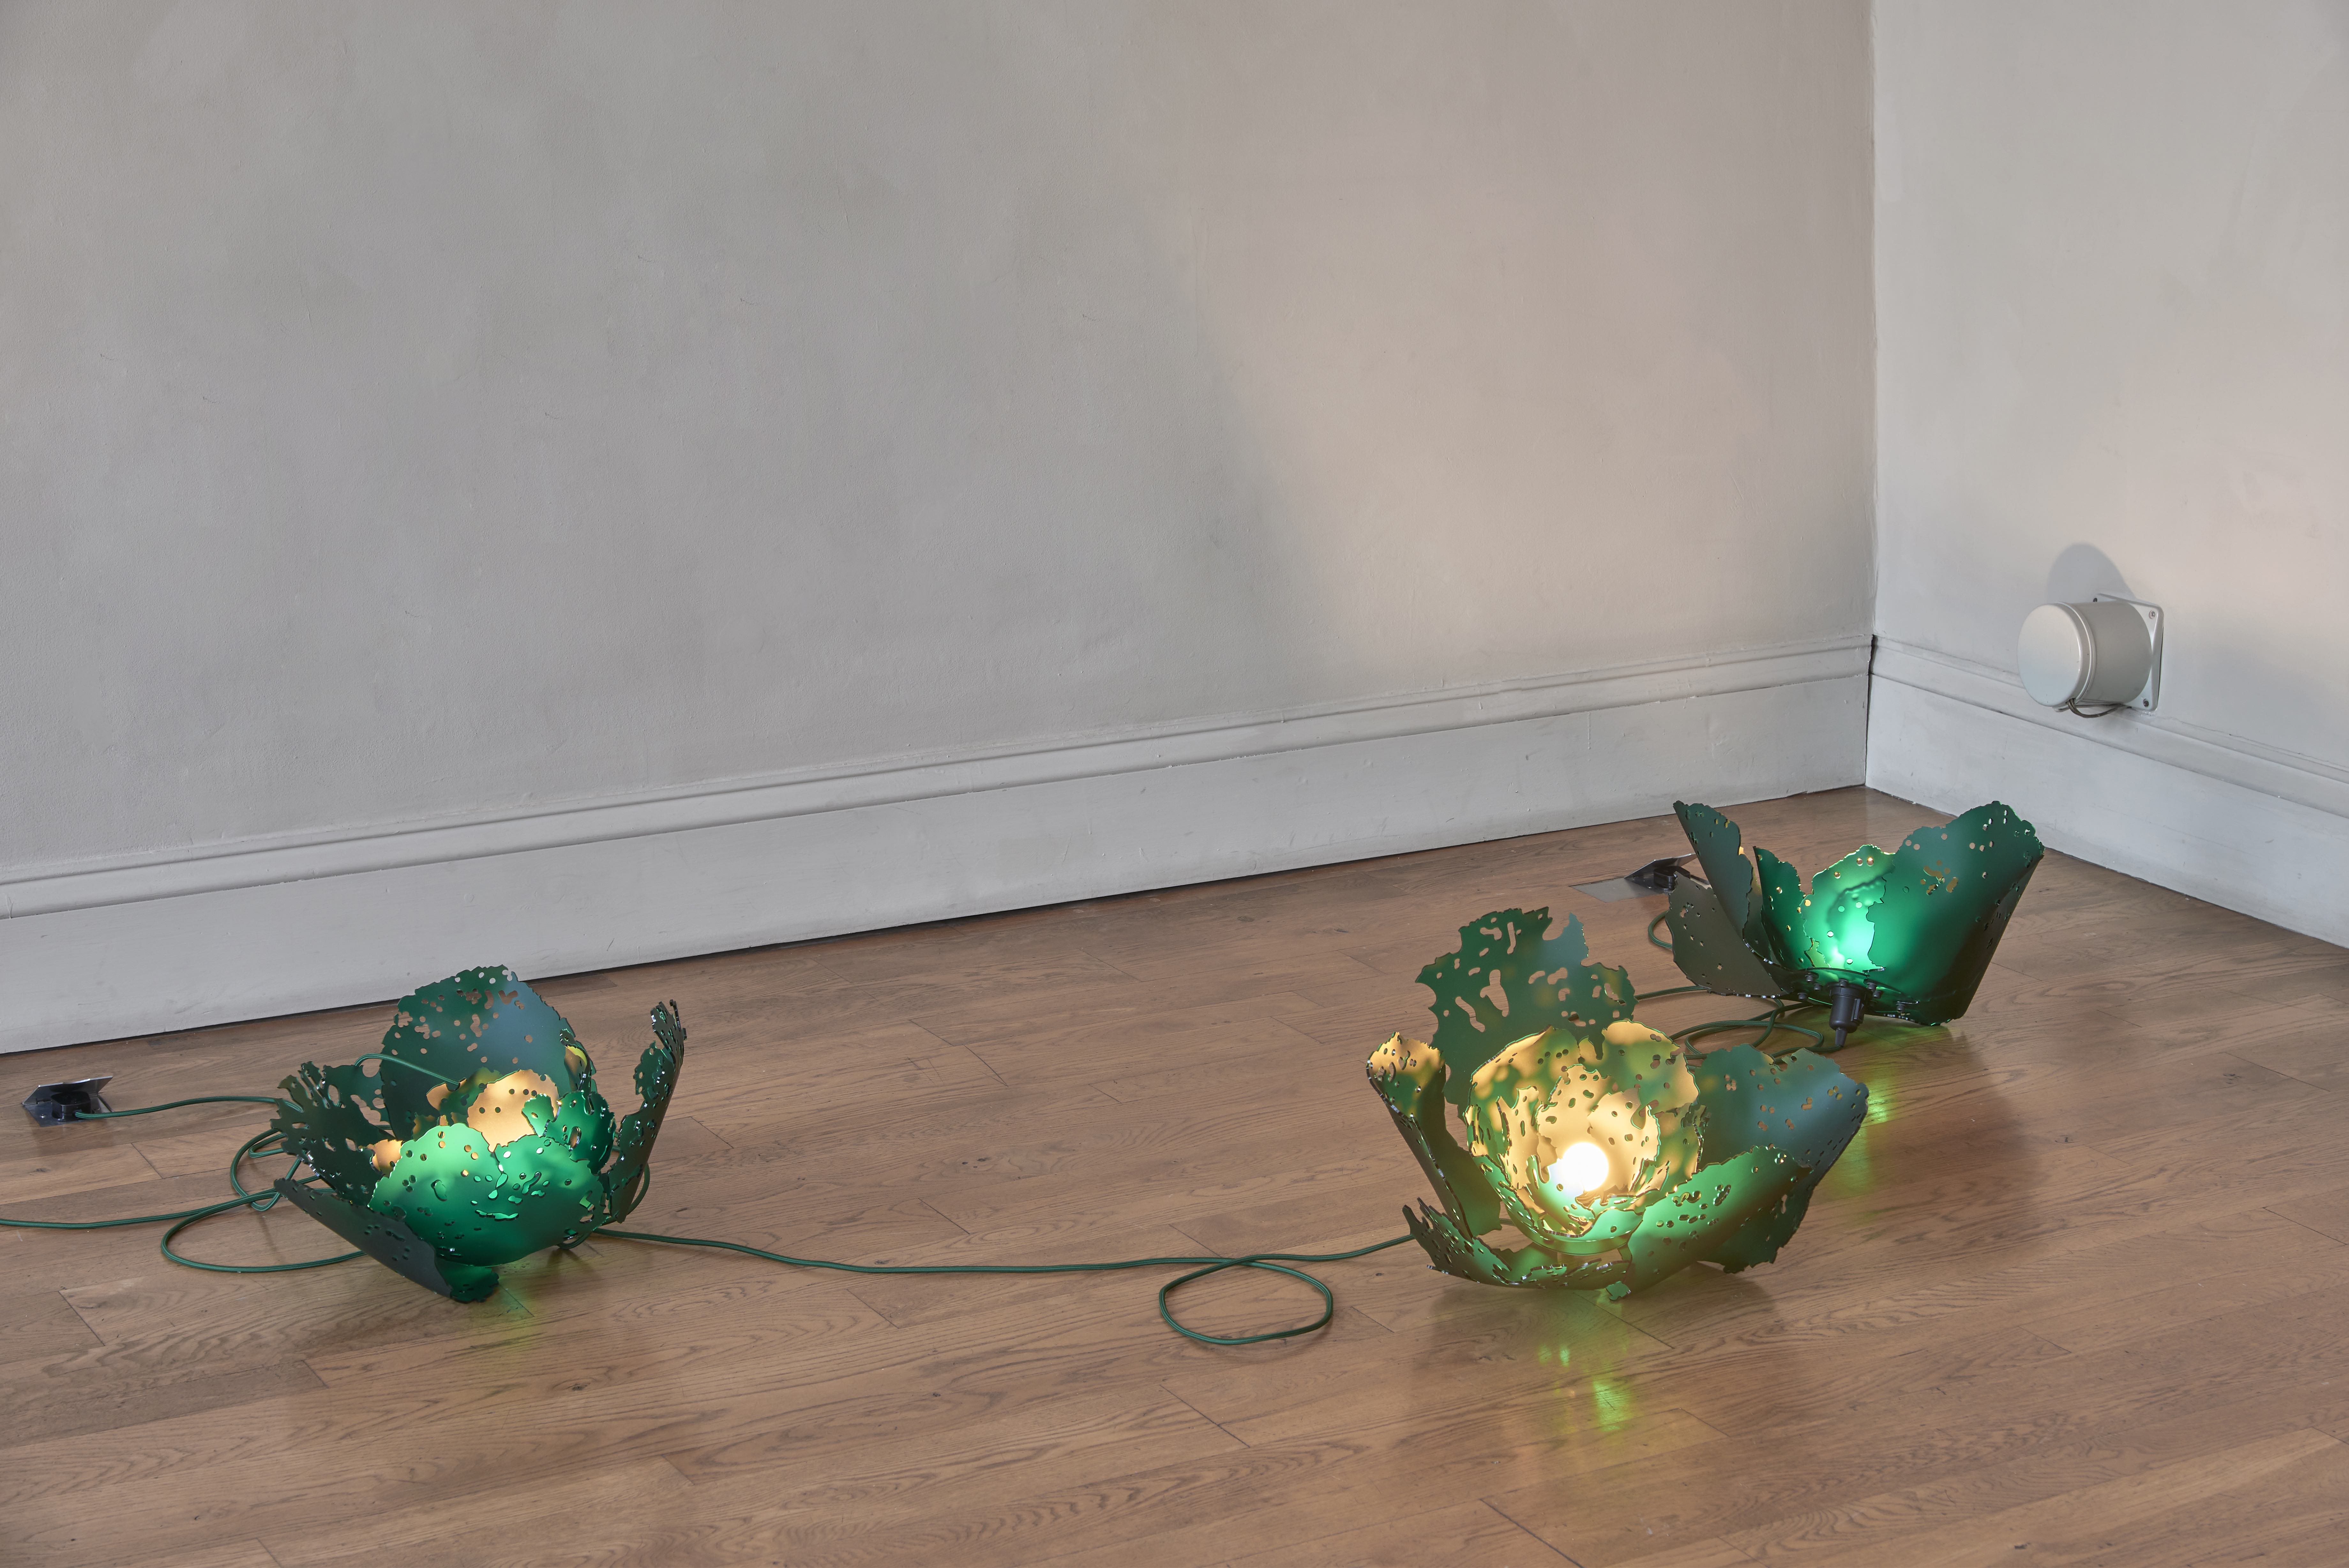 Rachel Adams 'Brassica' (group) frost acrylic, electric cable, metal fixings 36×45×45 cm, 2022; installation photography by Andy Keate)